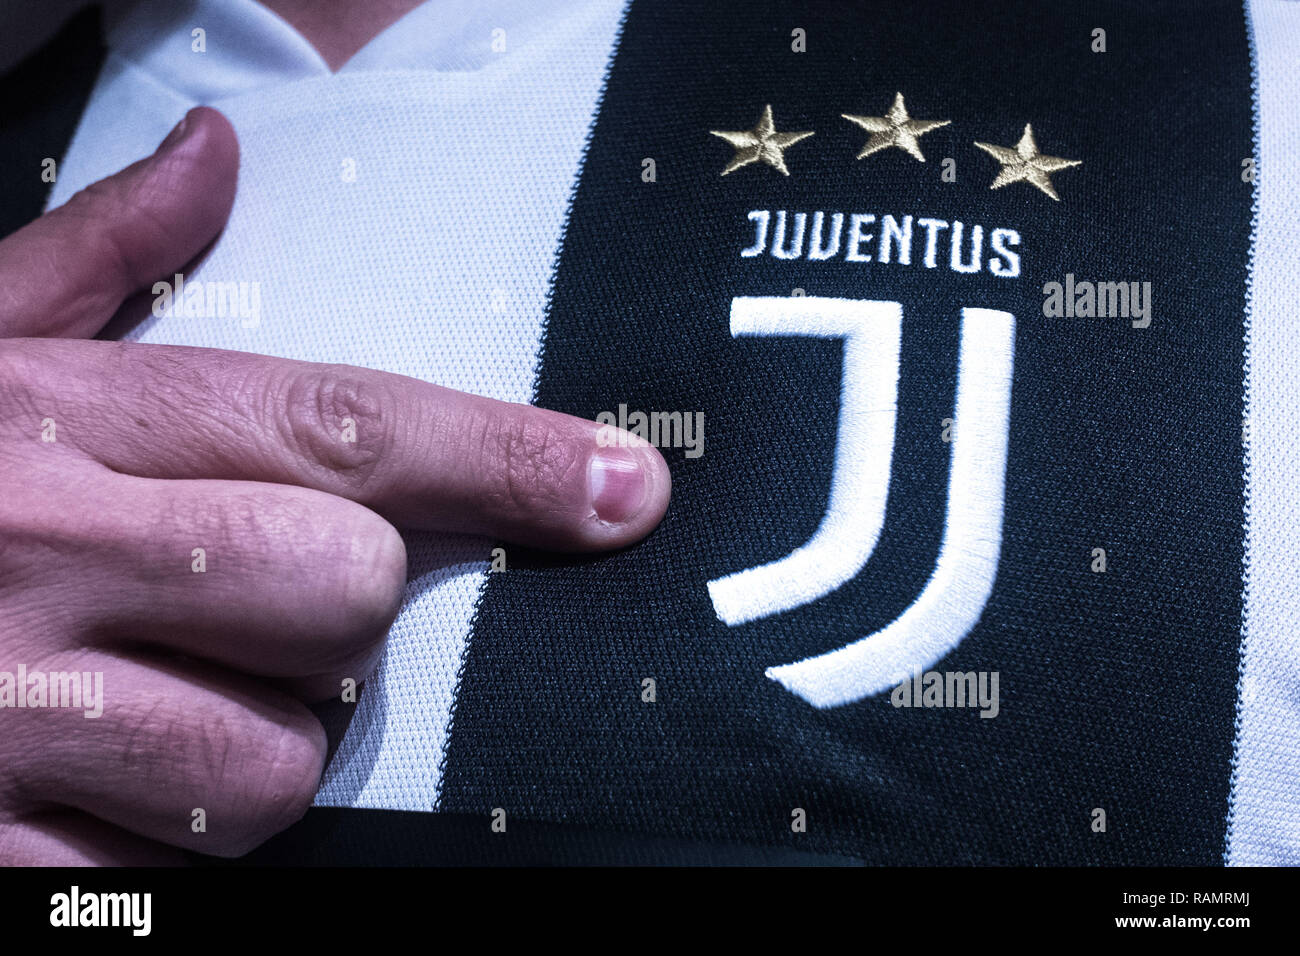 Italy 3rd January 2019 The New Juventus Logo Is Shown On